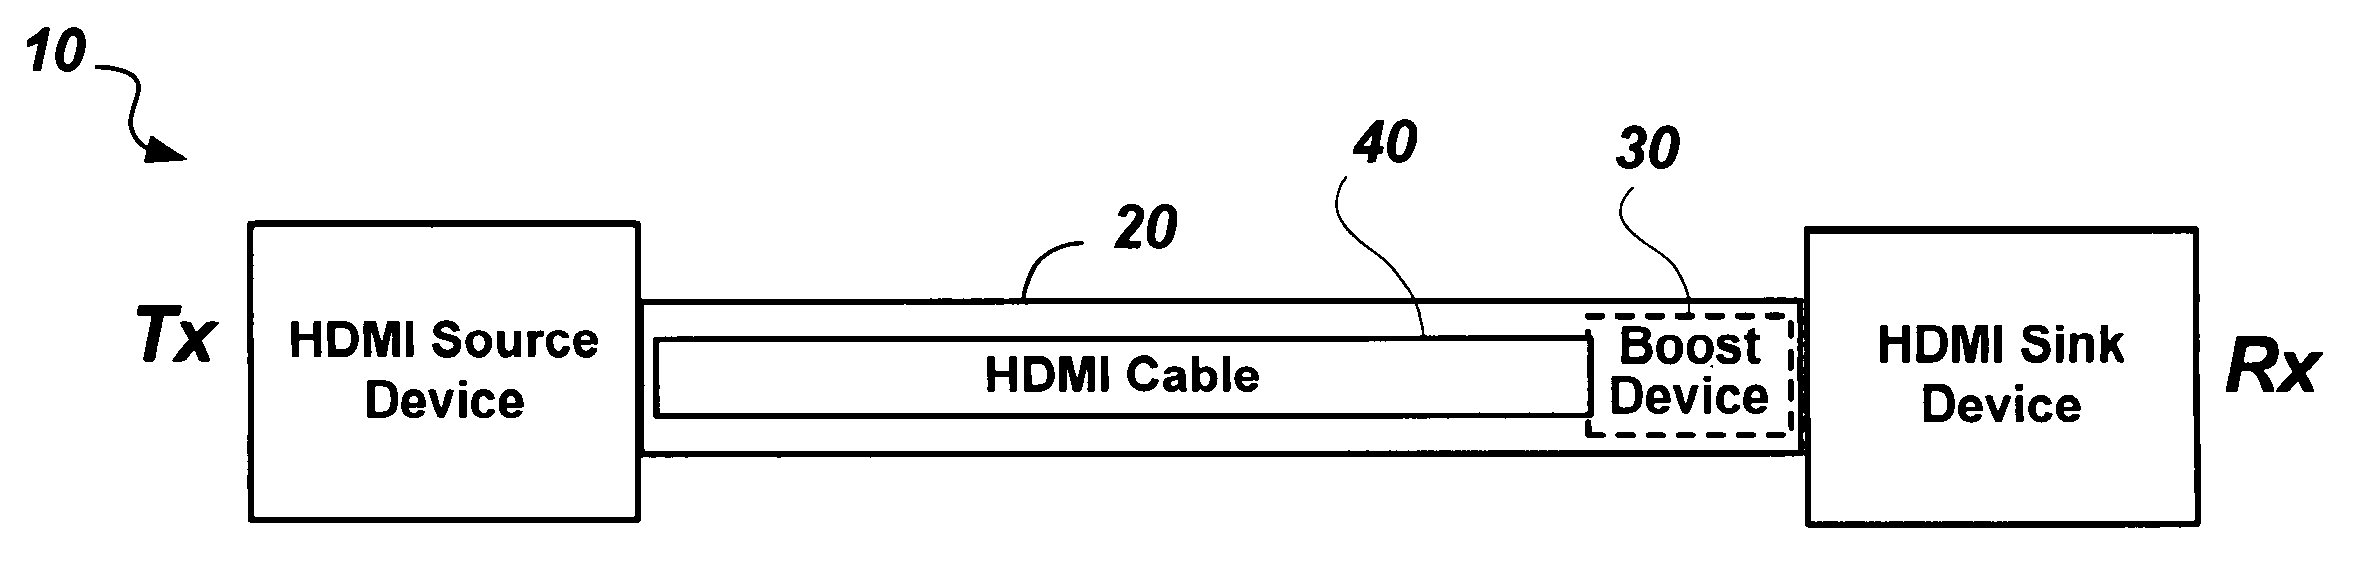 Self calibrating cable for high definition digital video interface